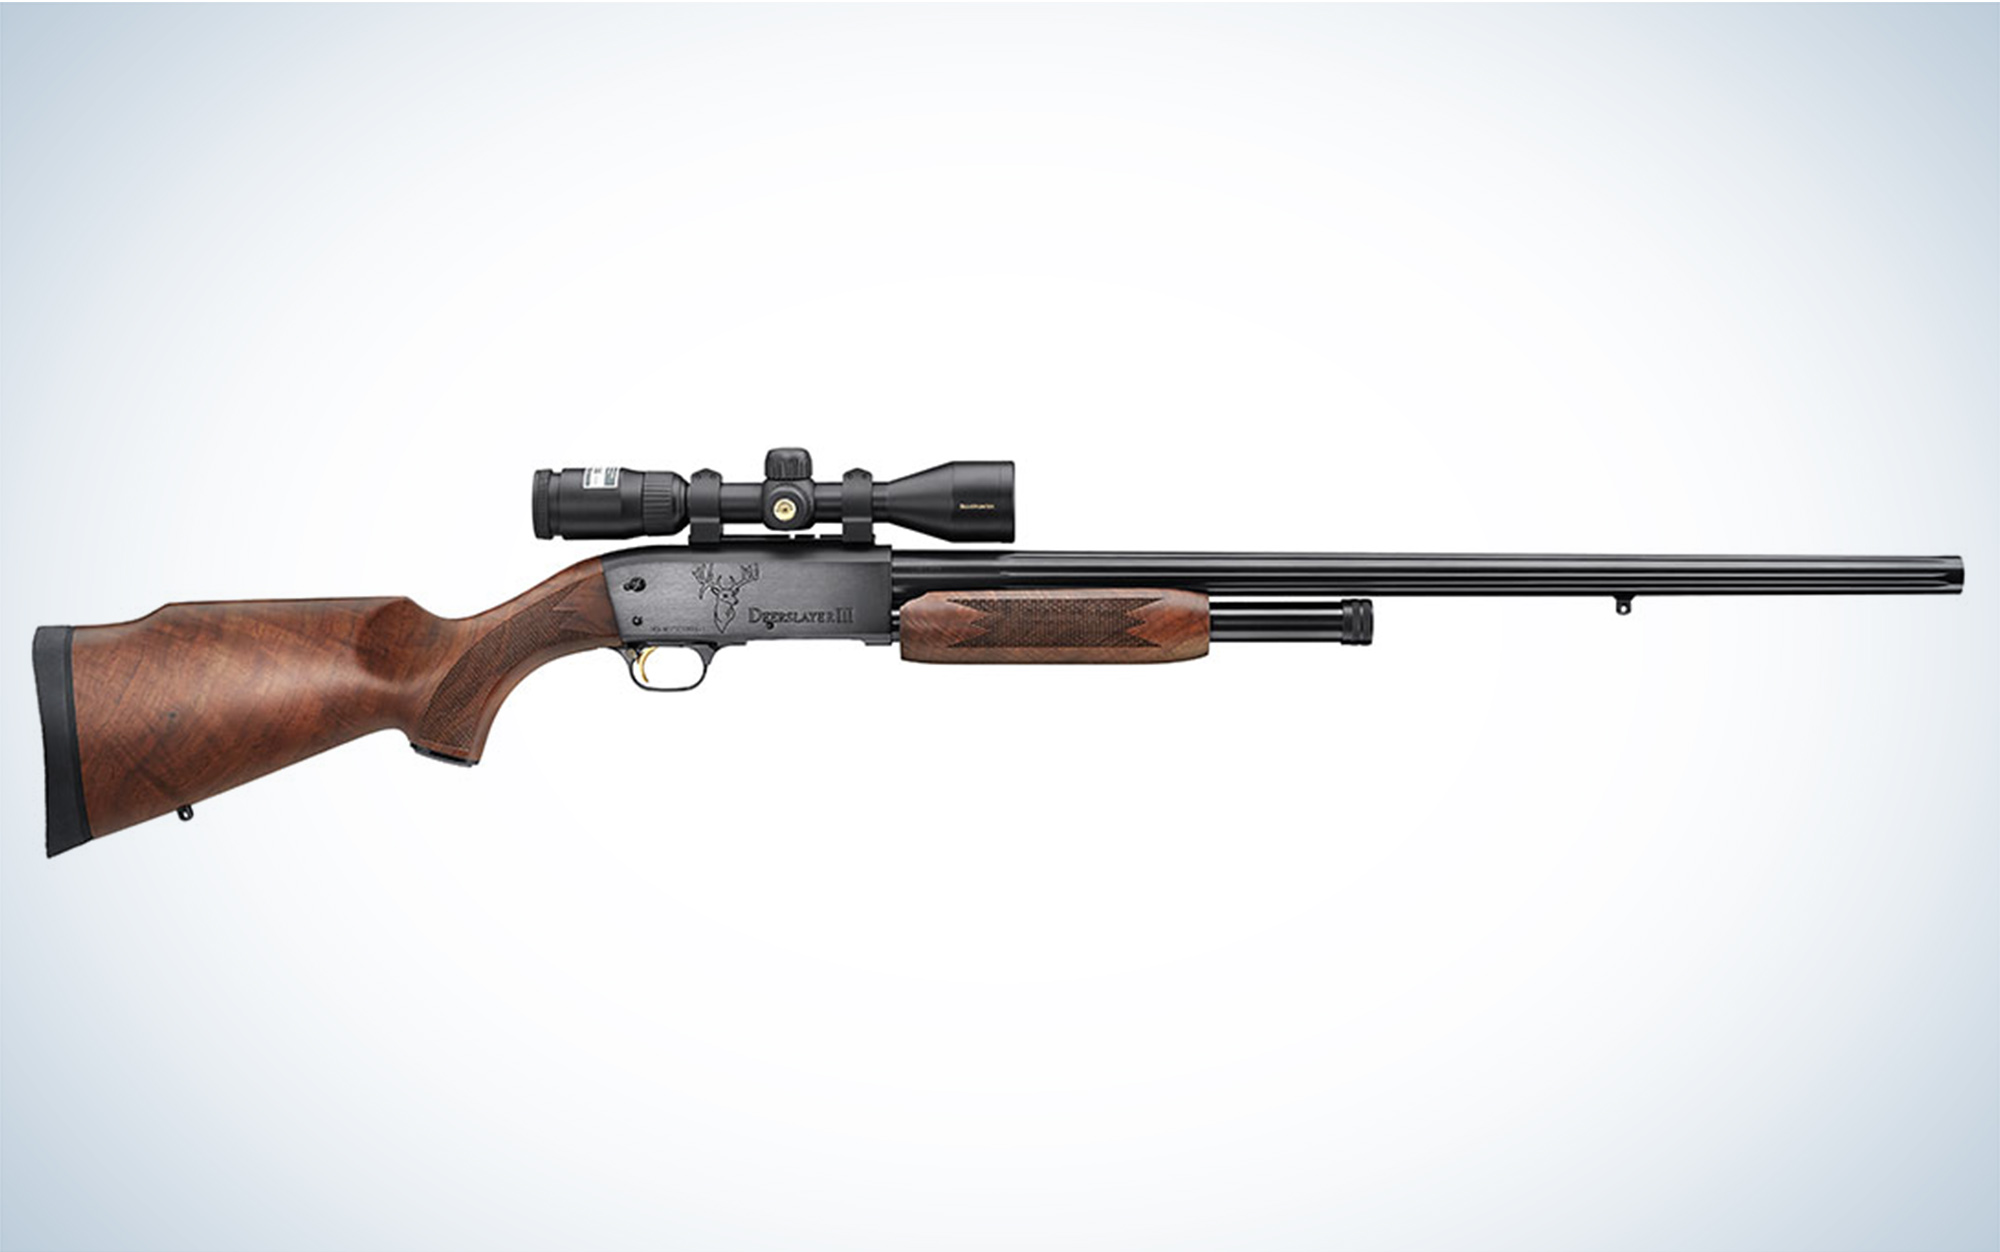 The Deerslayer III is available in 12 and 20 gauge.